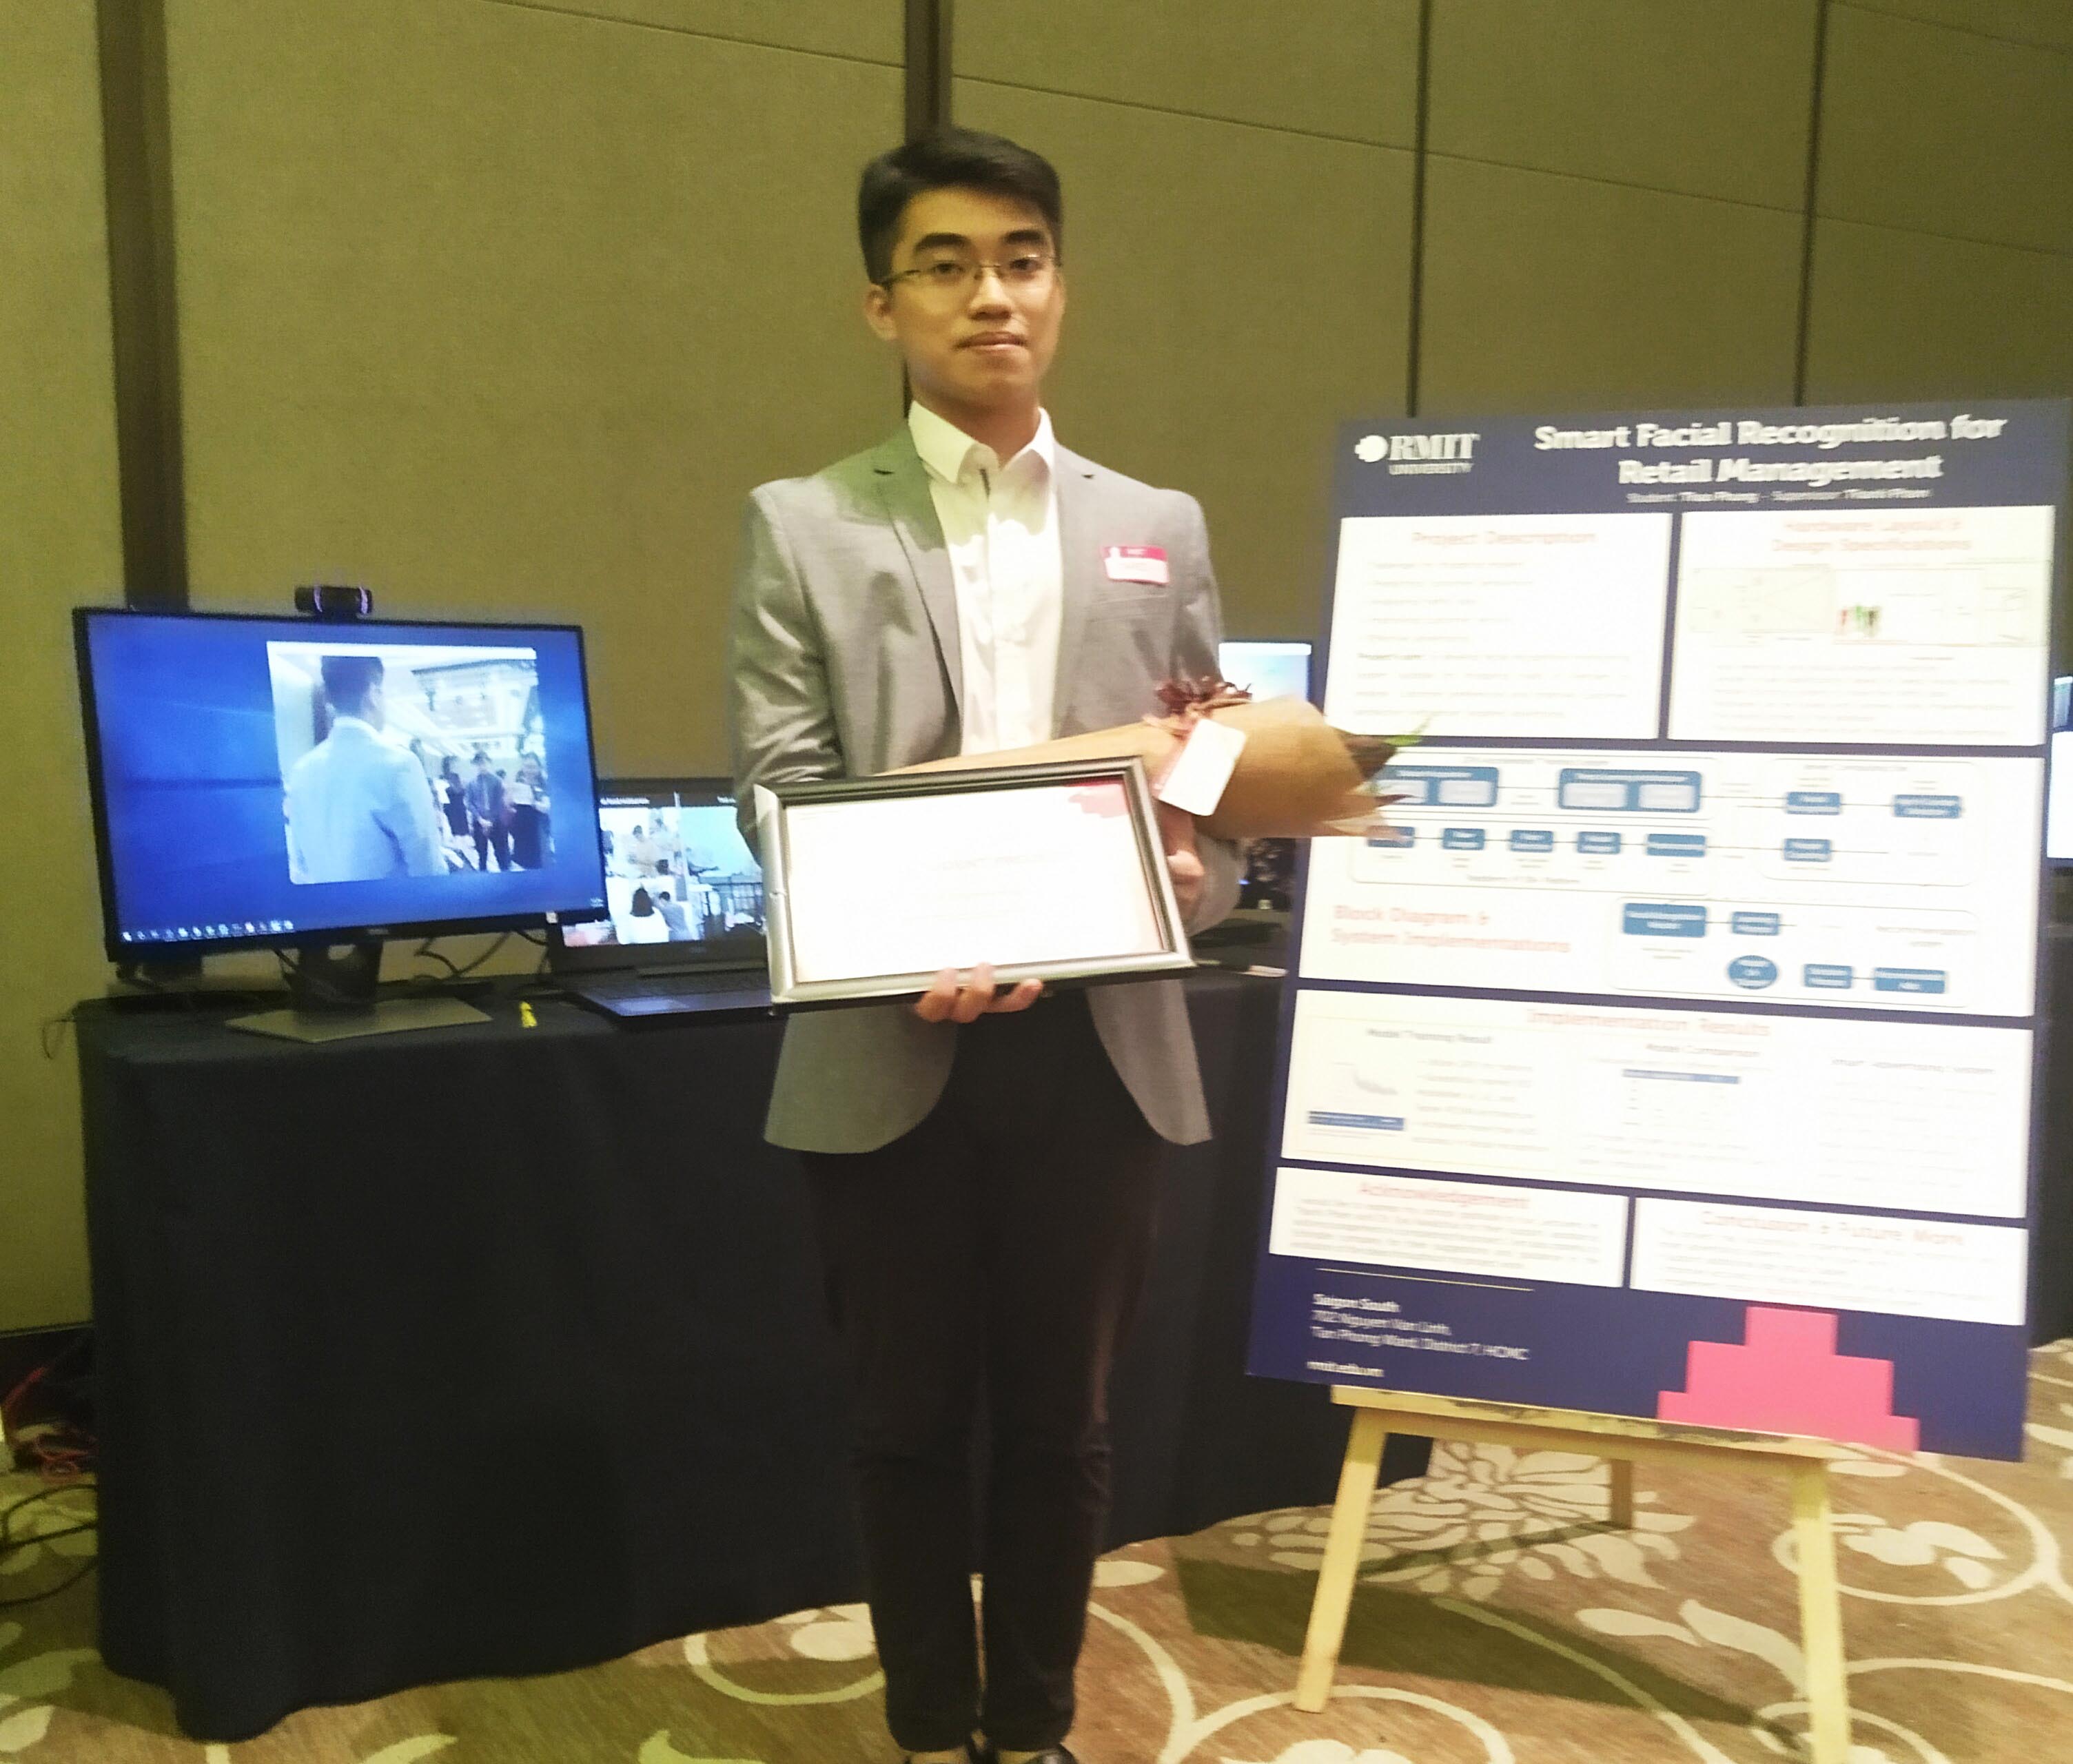 Thao received the Best Student Project prize in IT/Engineering